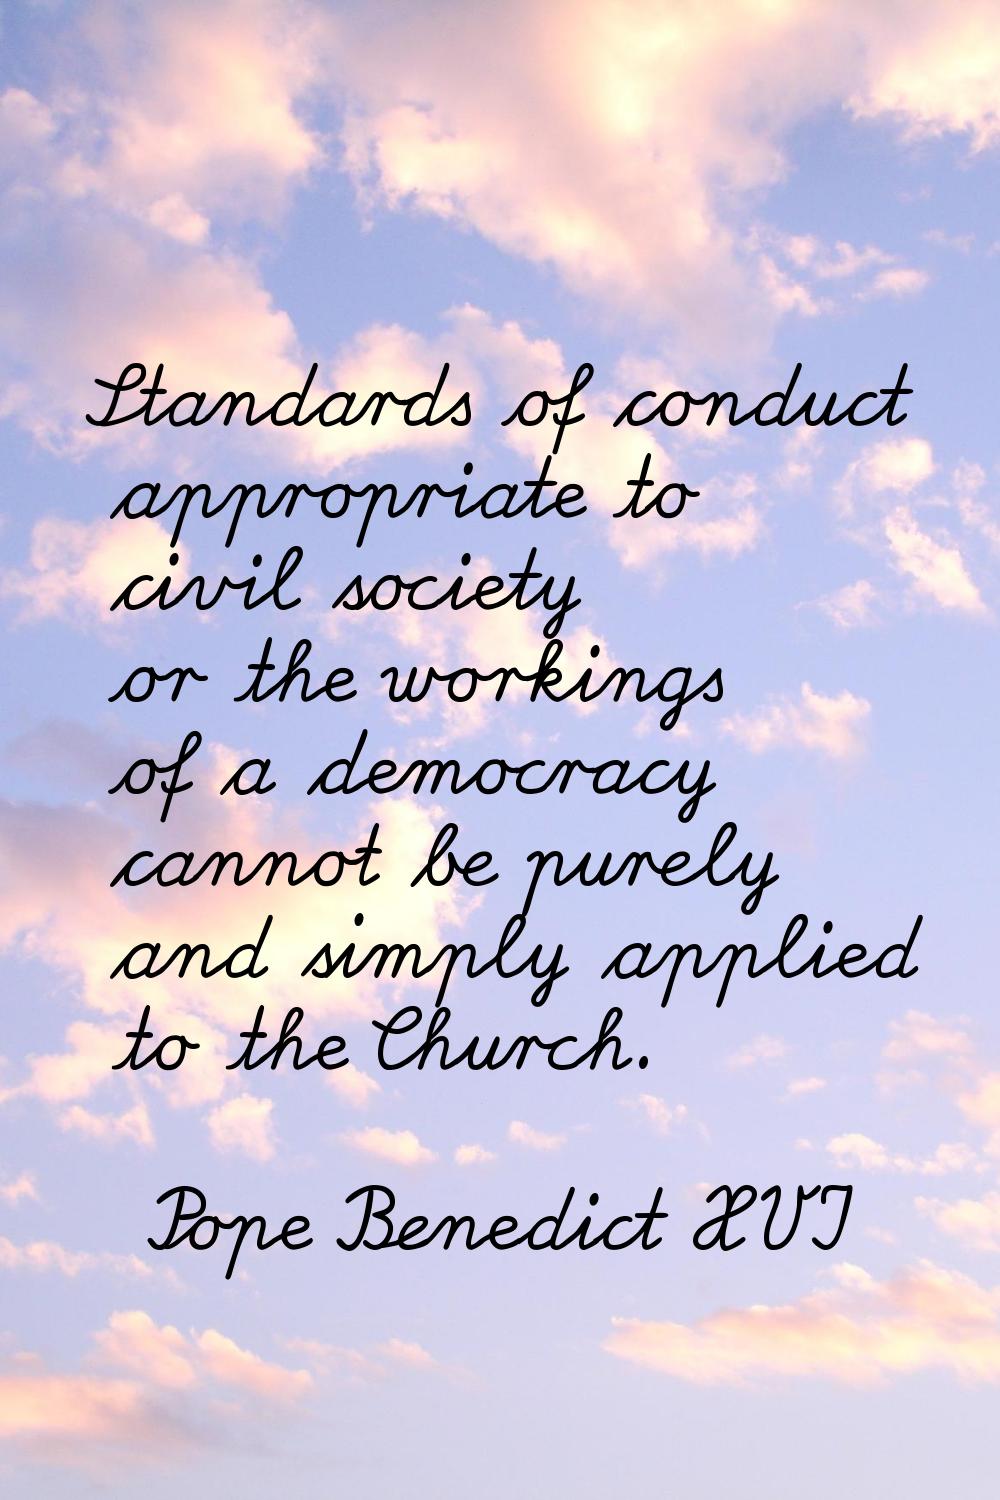 Standards of conduct appropriate to civil society or the workings of a democracy cannot be purely a